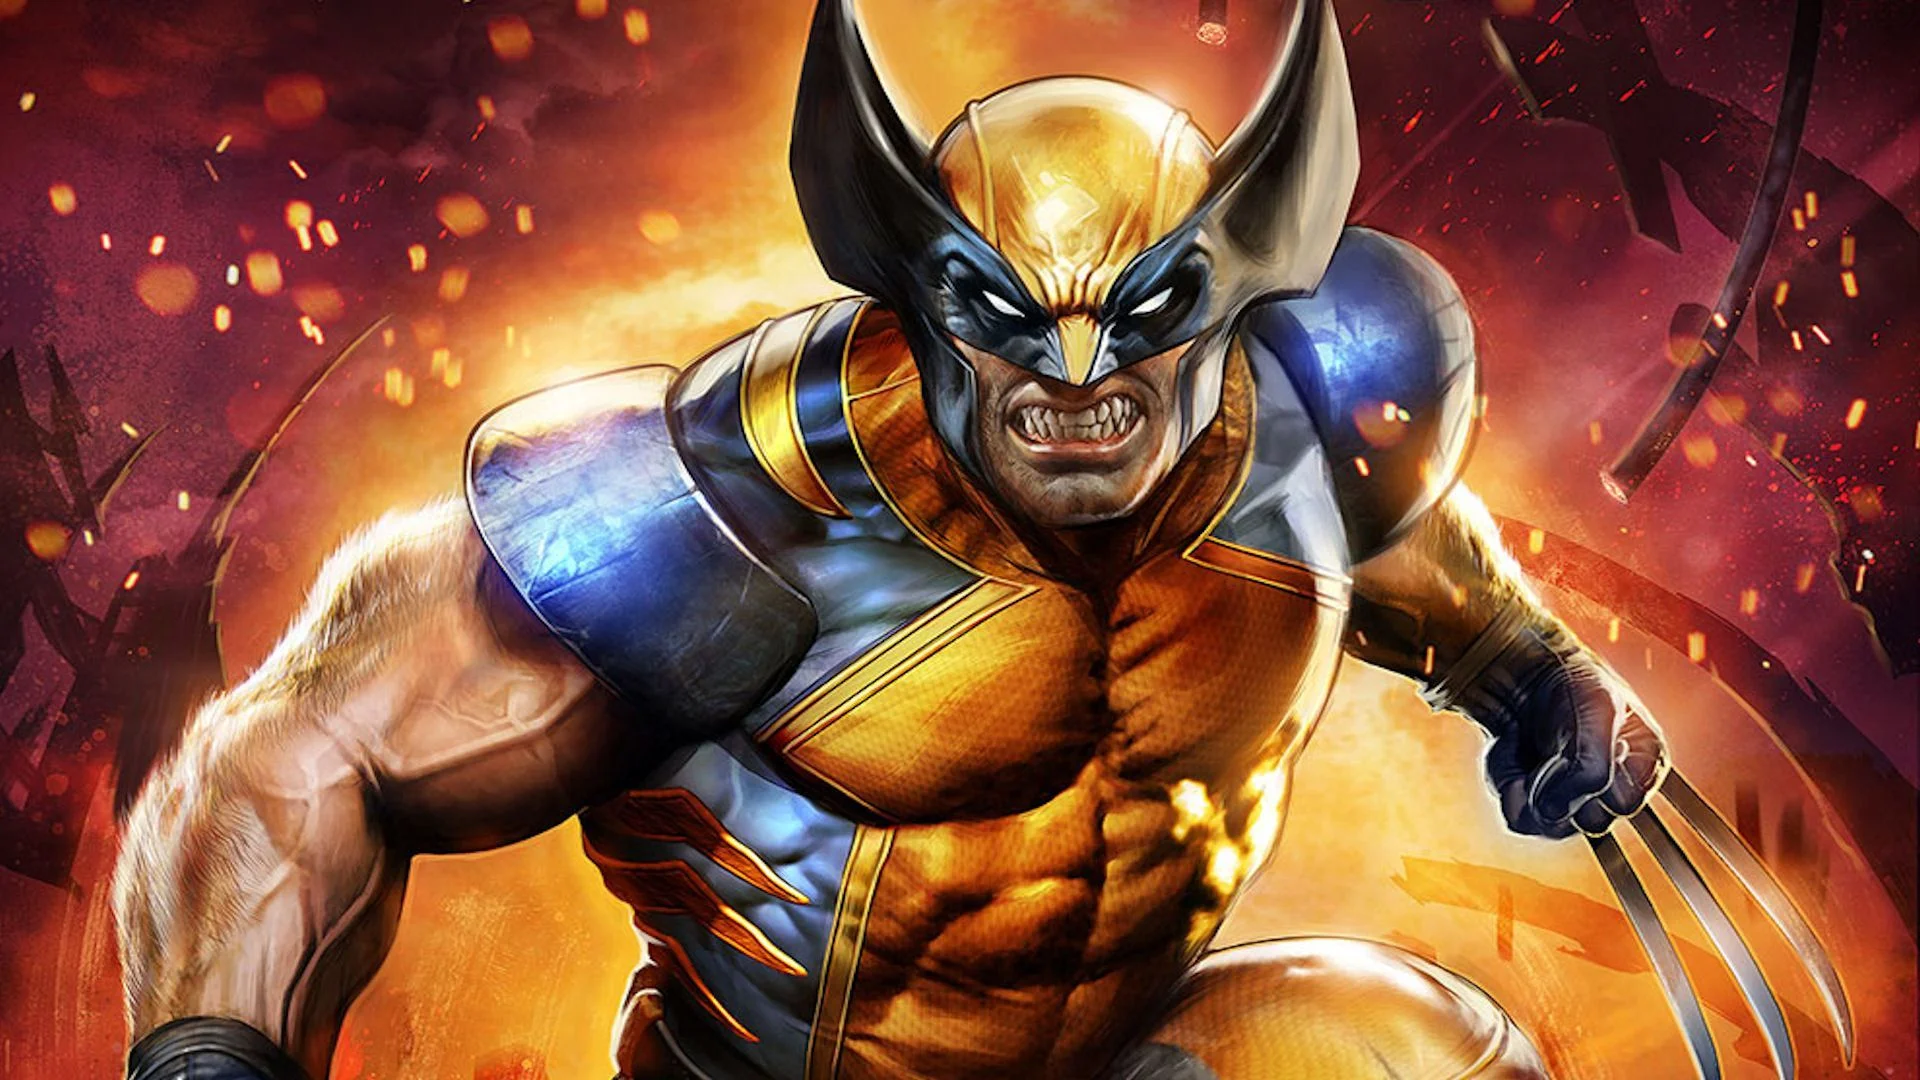 The plot of Marvel's Wolverine leaked online in the form of an animated comic